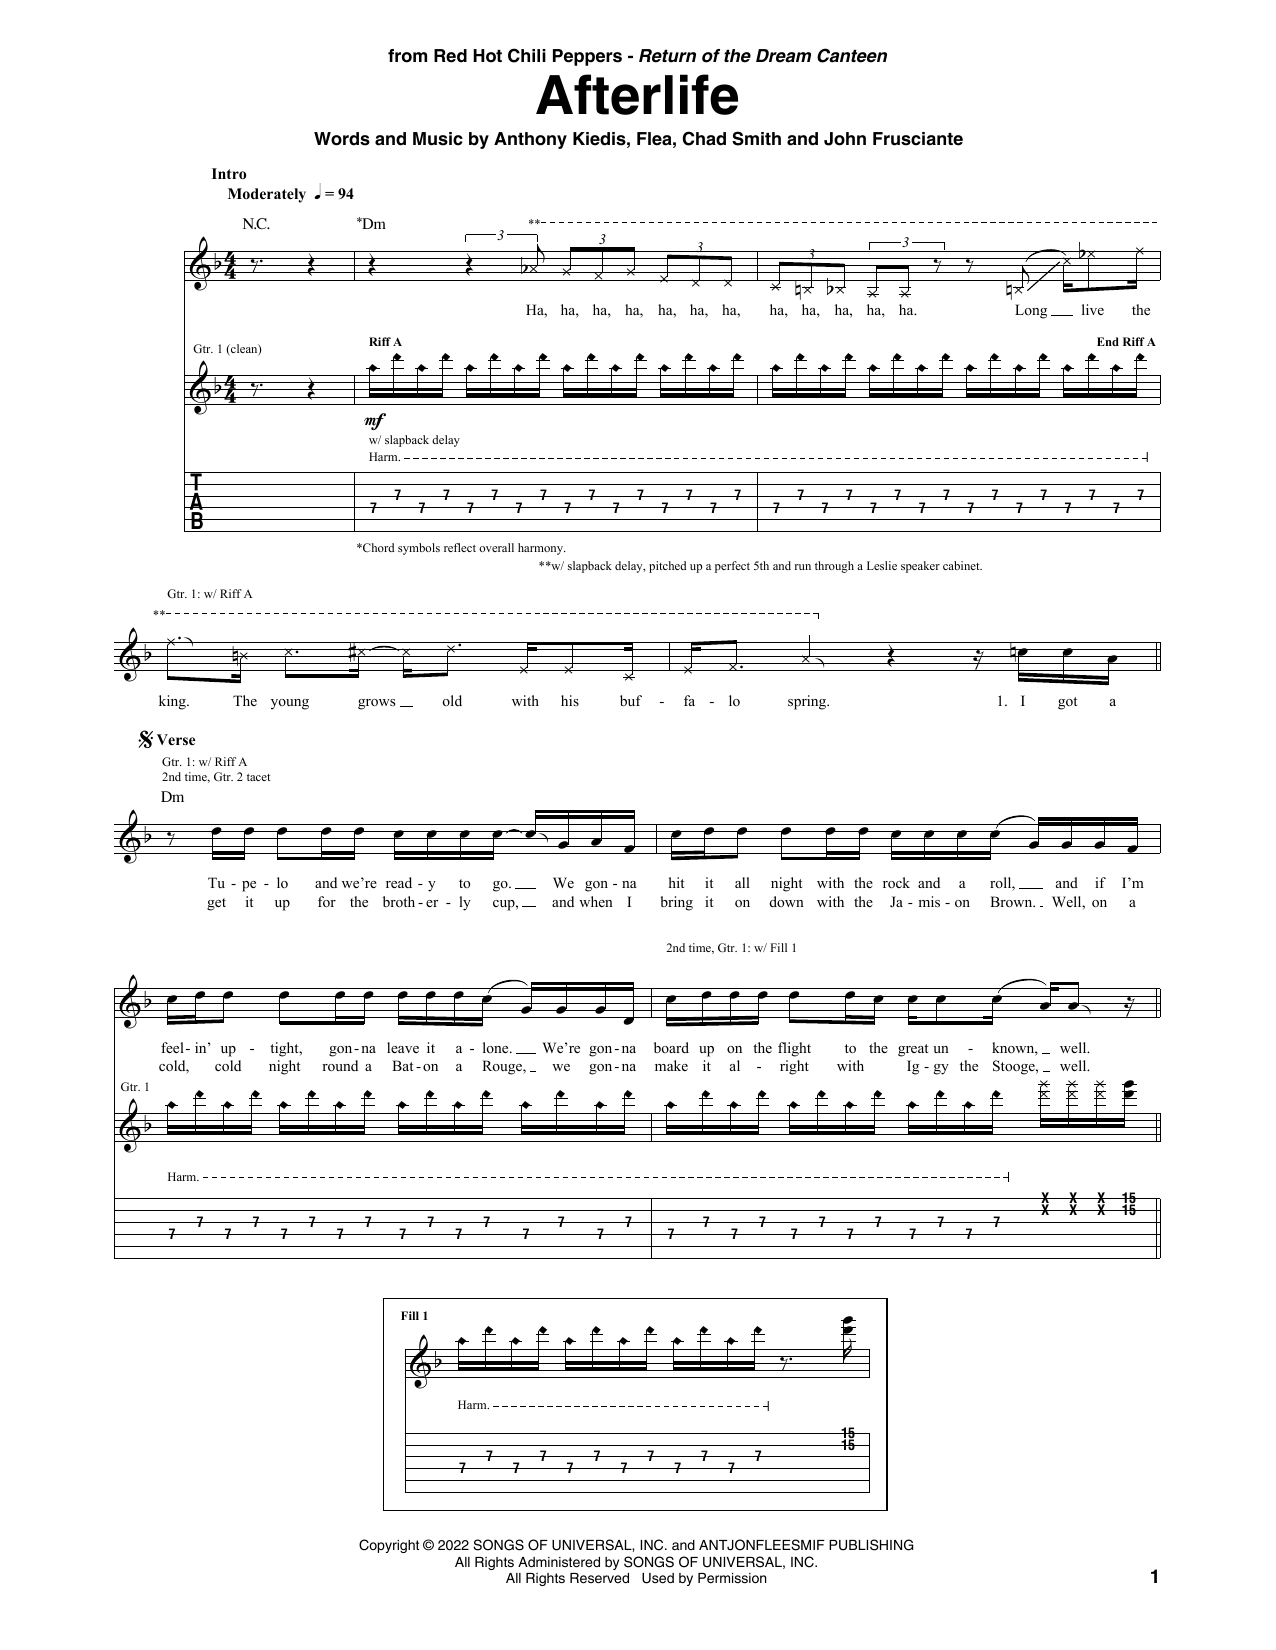 Download Red Hot Chili Peppers Afterlife Sheet Music